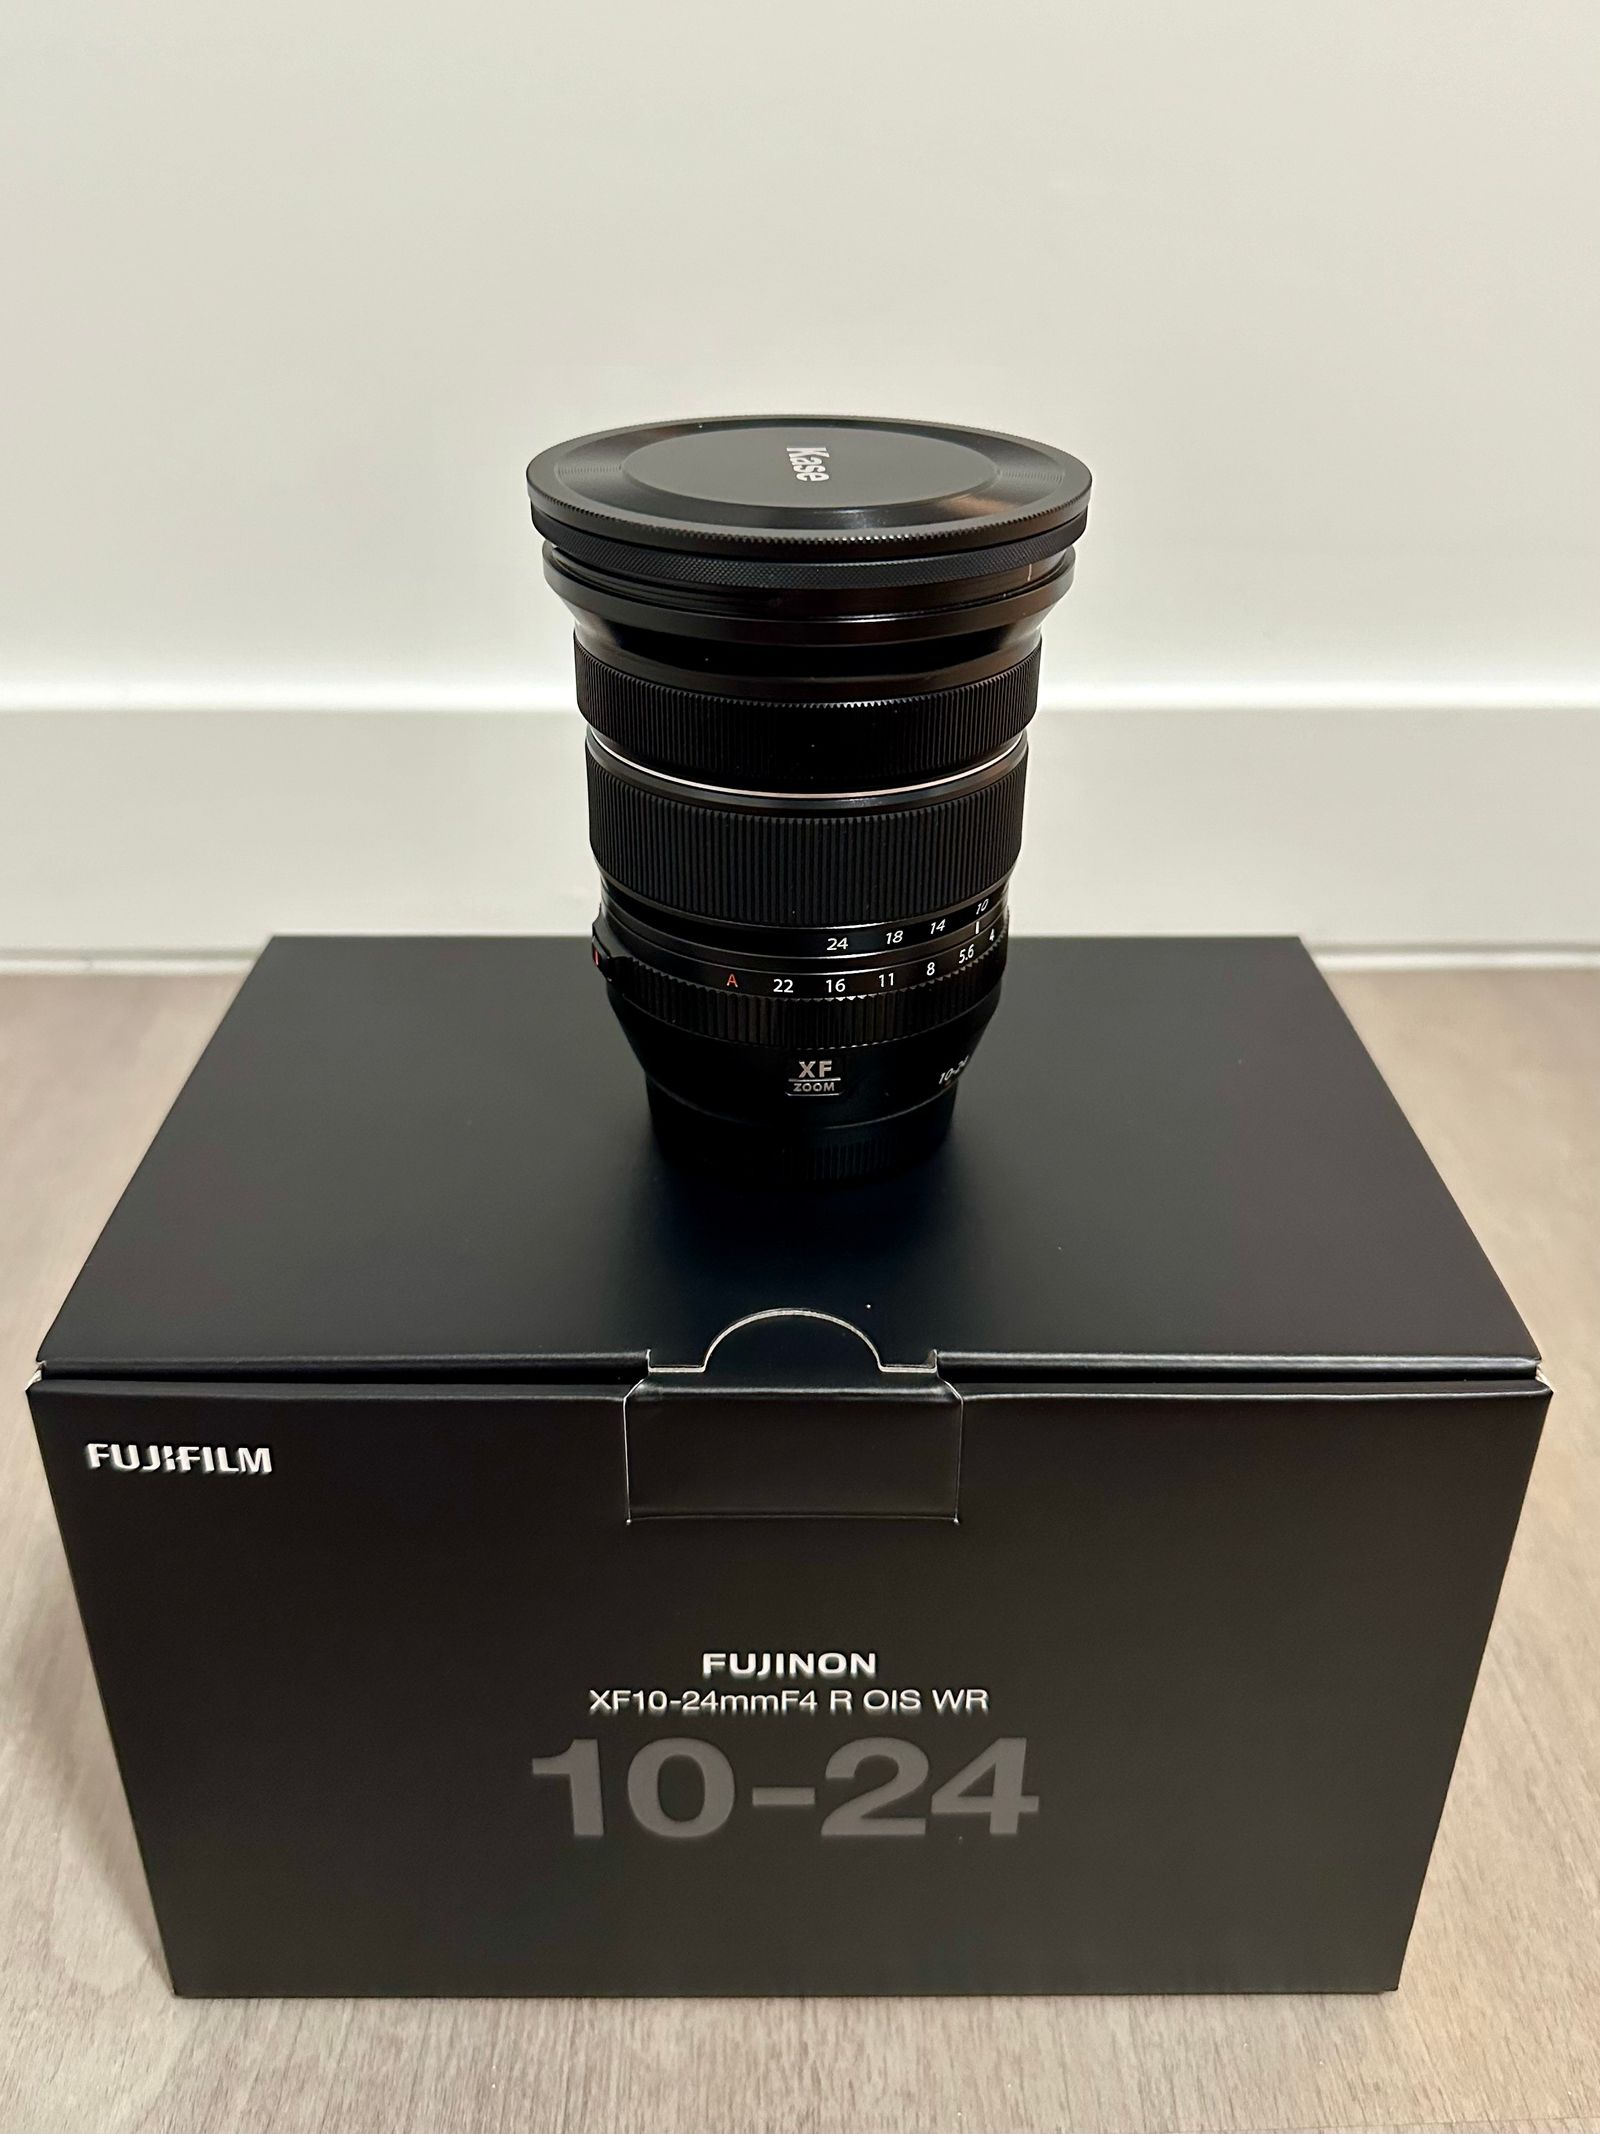 Fujifilm XF 10-24mm F2.8 R OIS WR Lens From AFJG Photography On Gear Focus